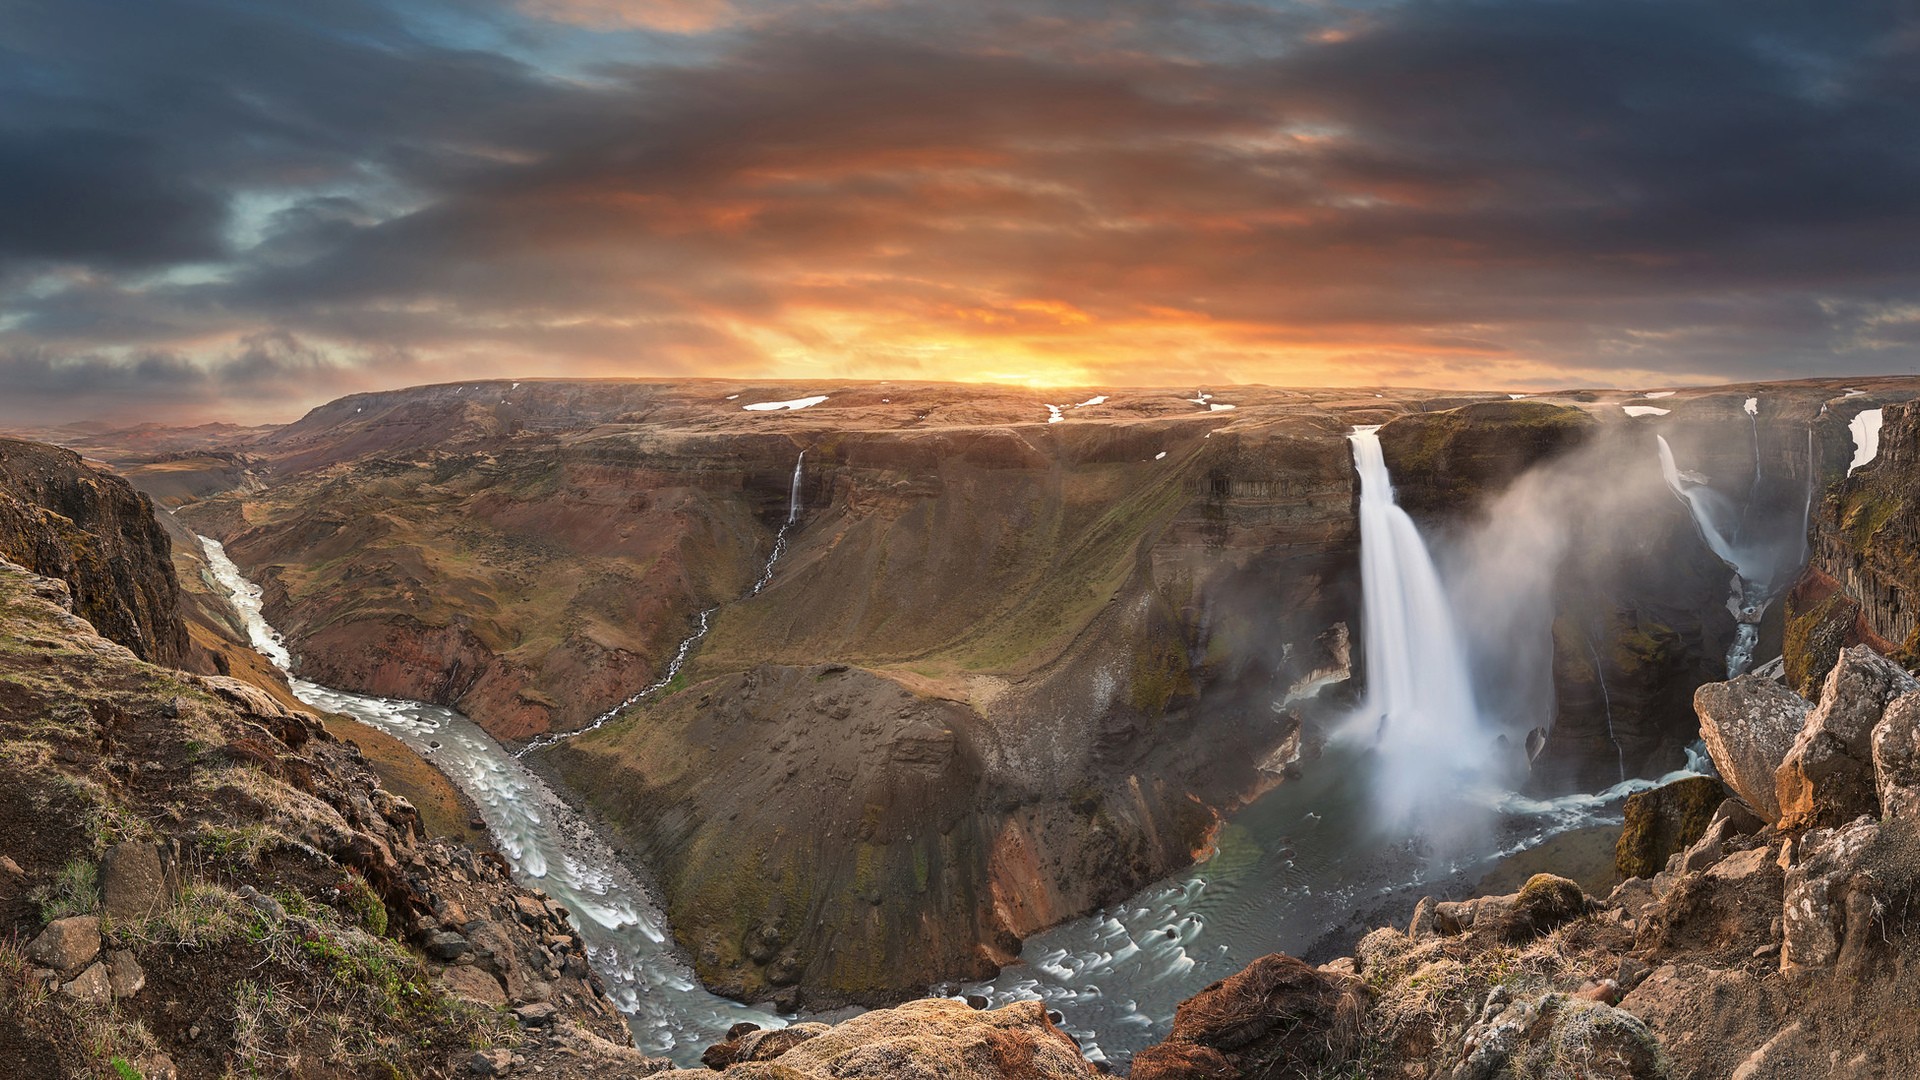 General 1920x1080 nature landscape waterfall long exposure Iceland mountains river rocks clouds sunset stream stones valley nordic landscapes